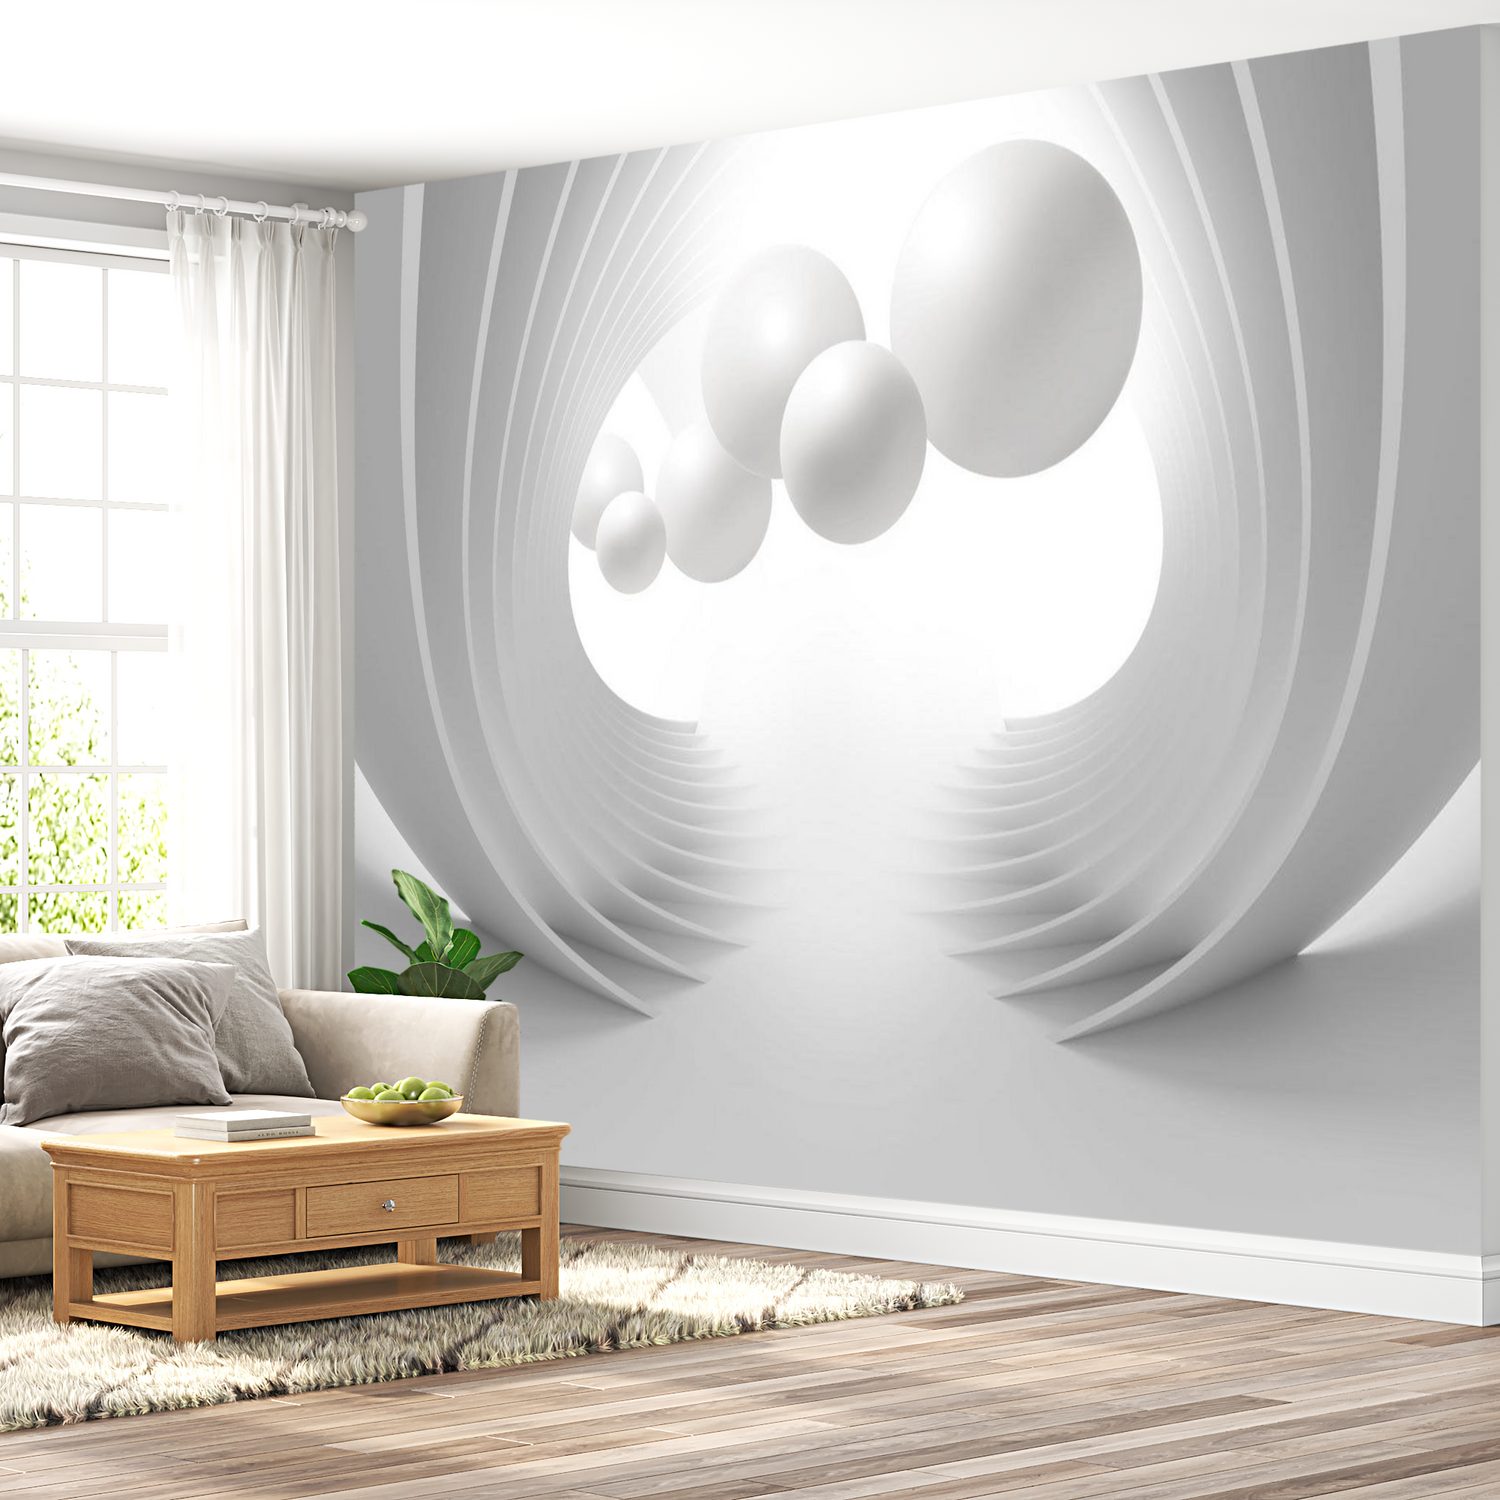 3D Illusion Wallpaper Wall Mural - Gate Of Modernity 39"Wx27"H